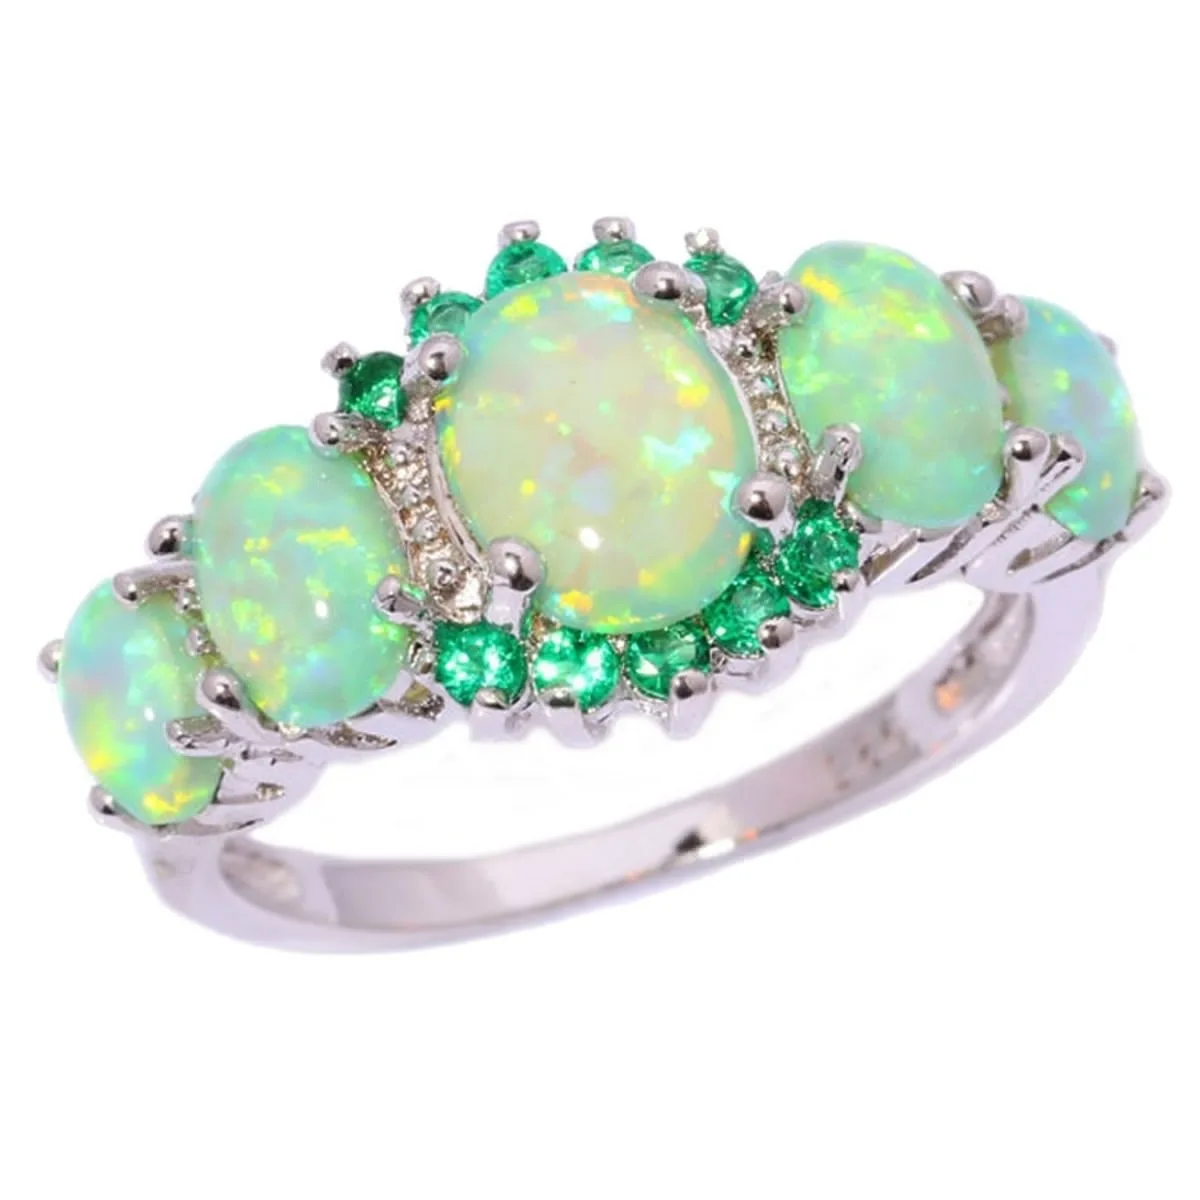 

2022 Summer Girlfriend Jewelry Gift Gemstone Ring Elegant Obeon Ring Clear Green Blue Fire Opal Ring for Girls